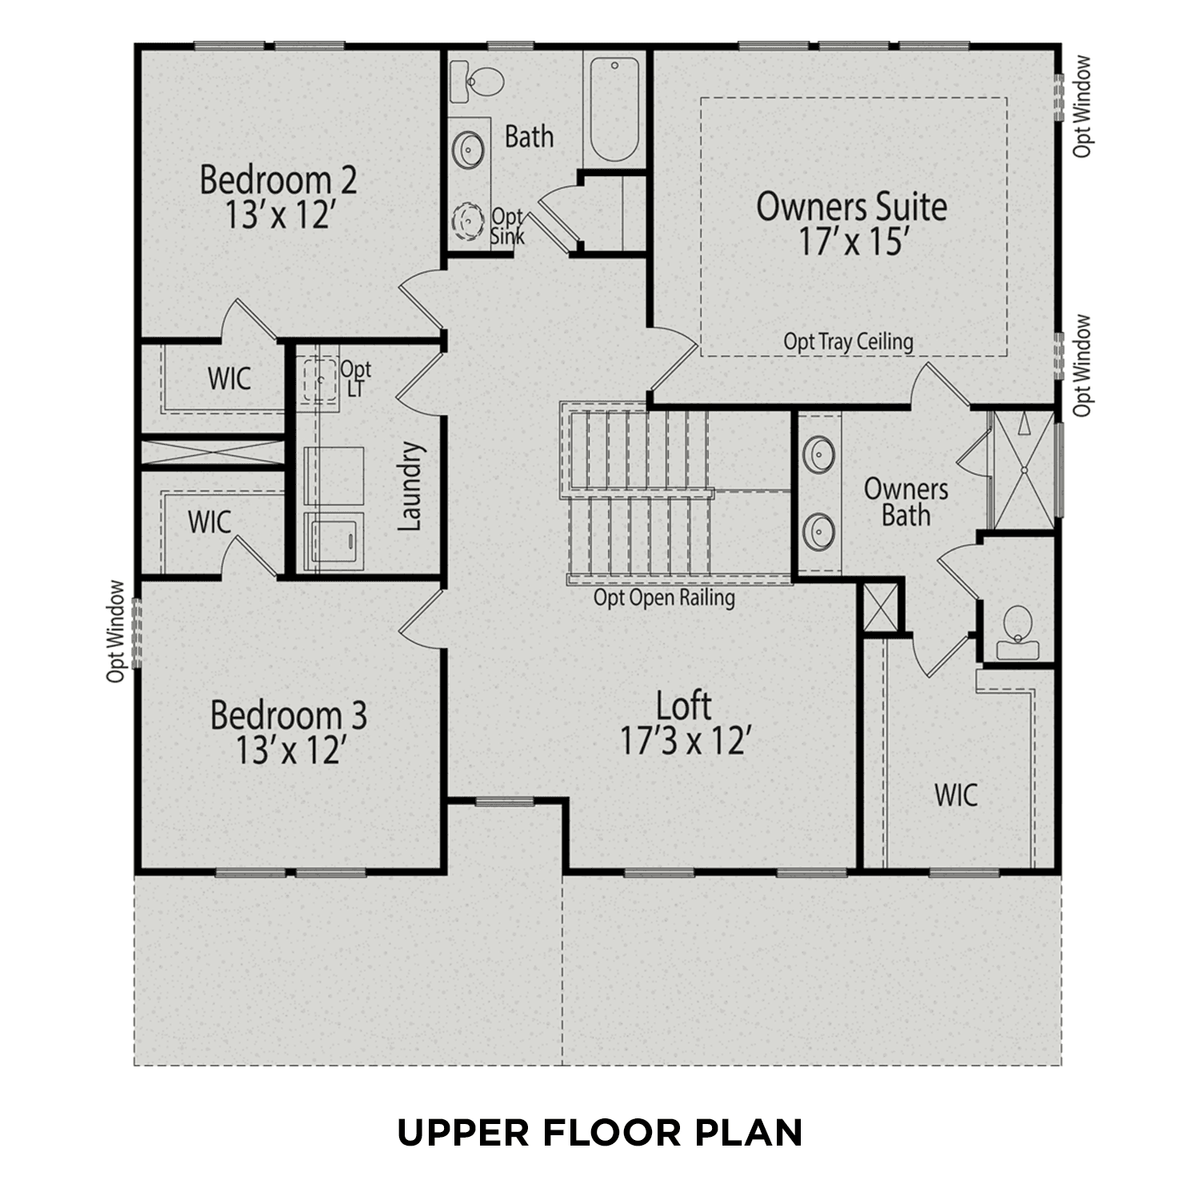 2 - The Willow E floor plan layout for 637 Marion Hills Way in Davidson Homes' Glenmere community.